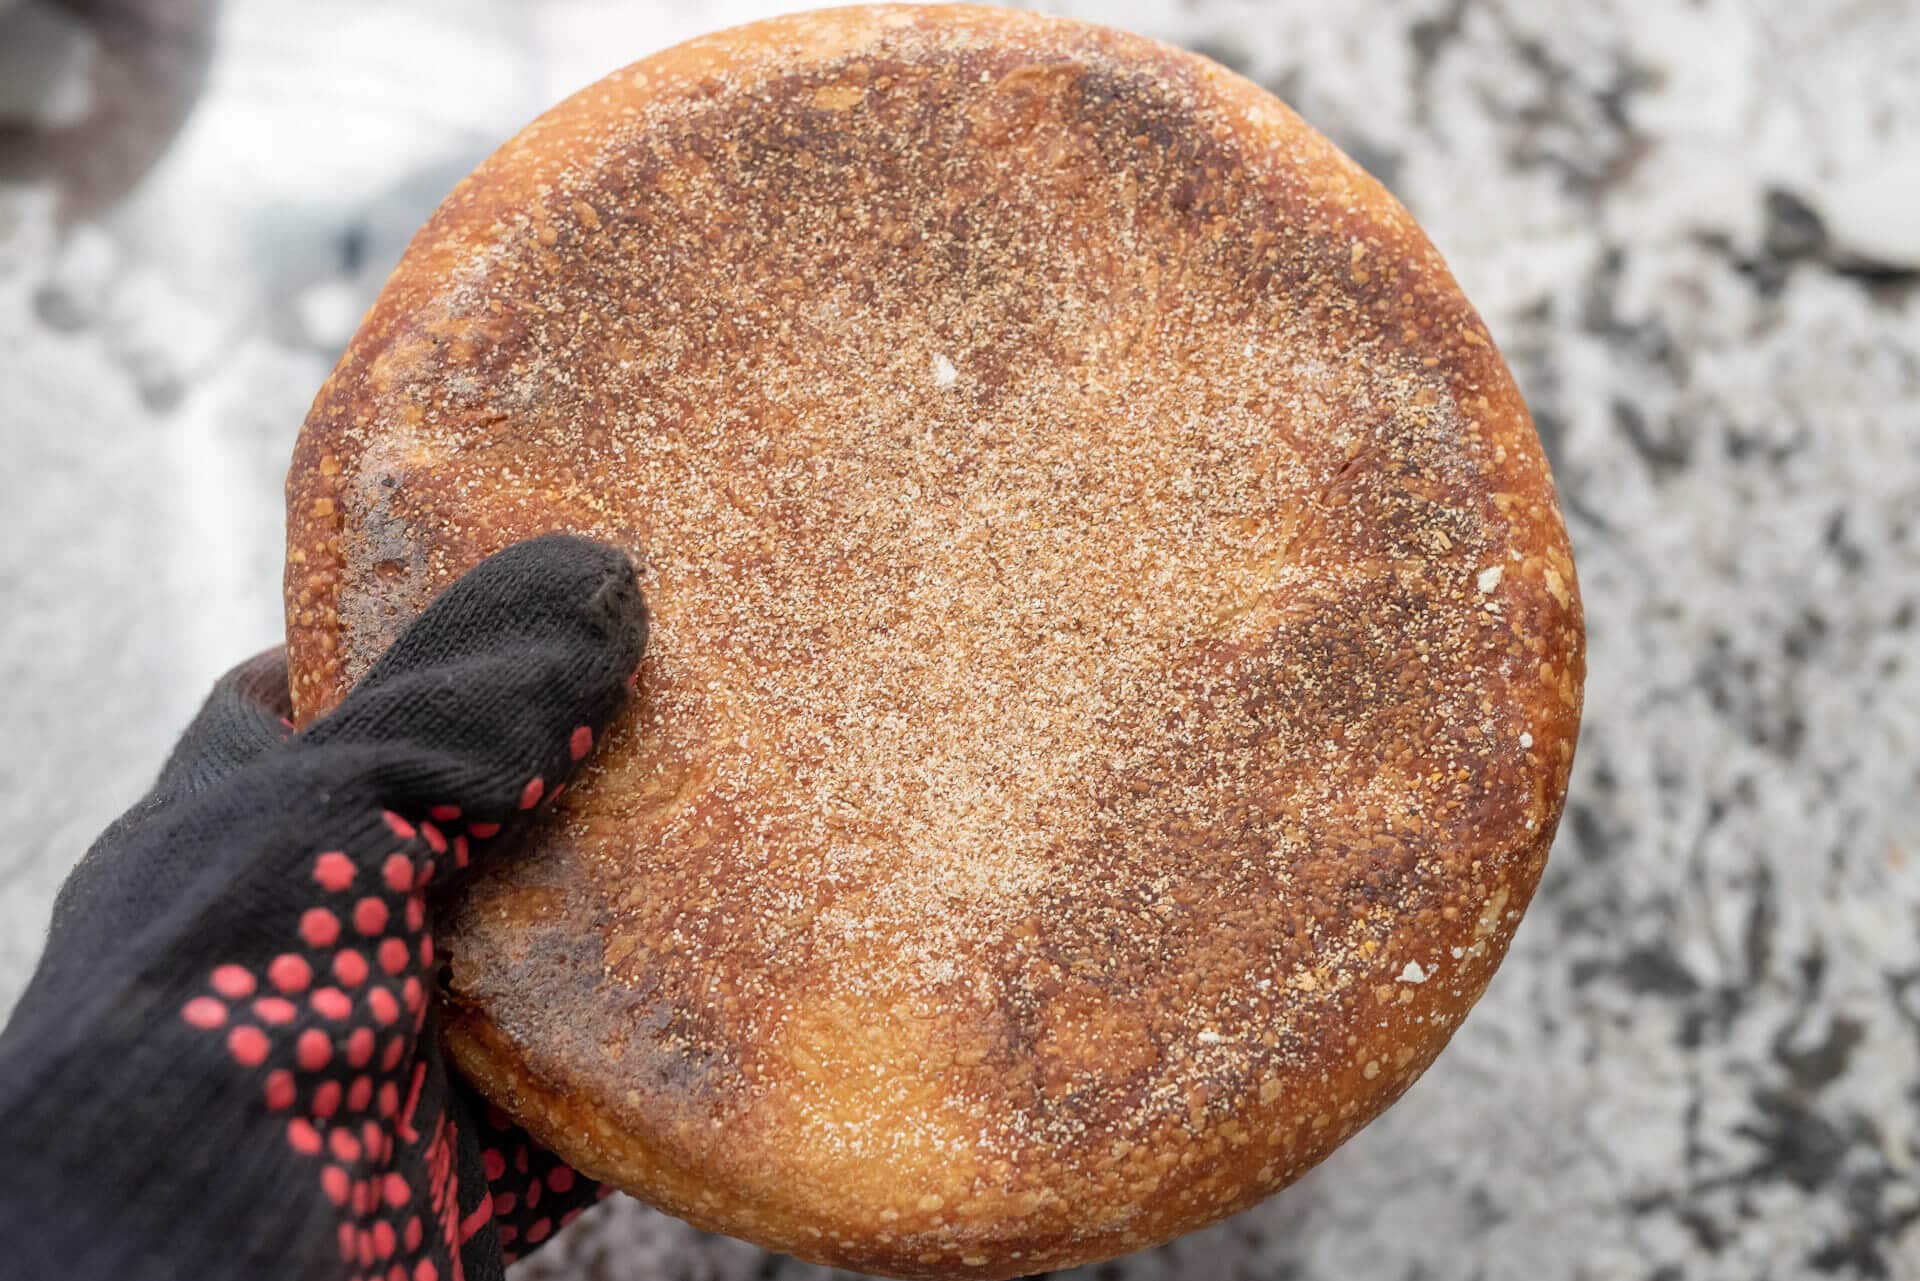 Bottom of the baked boule with wheat germ/bran is used as an insulator.